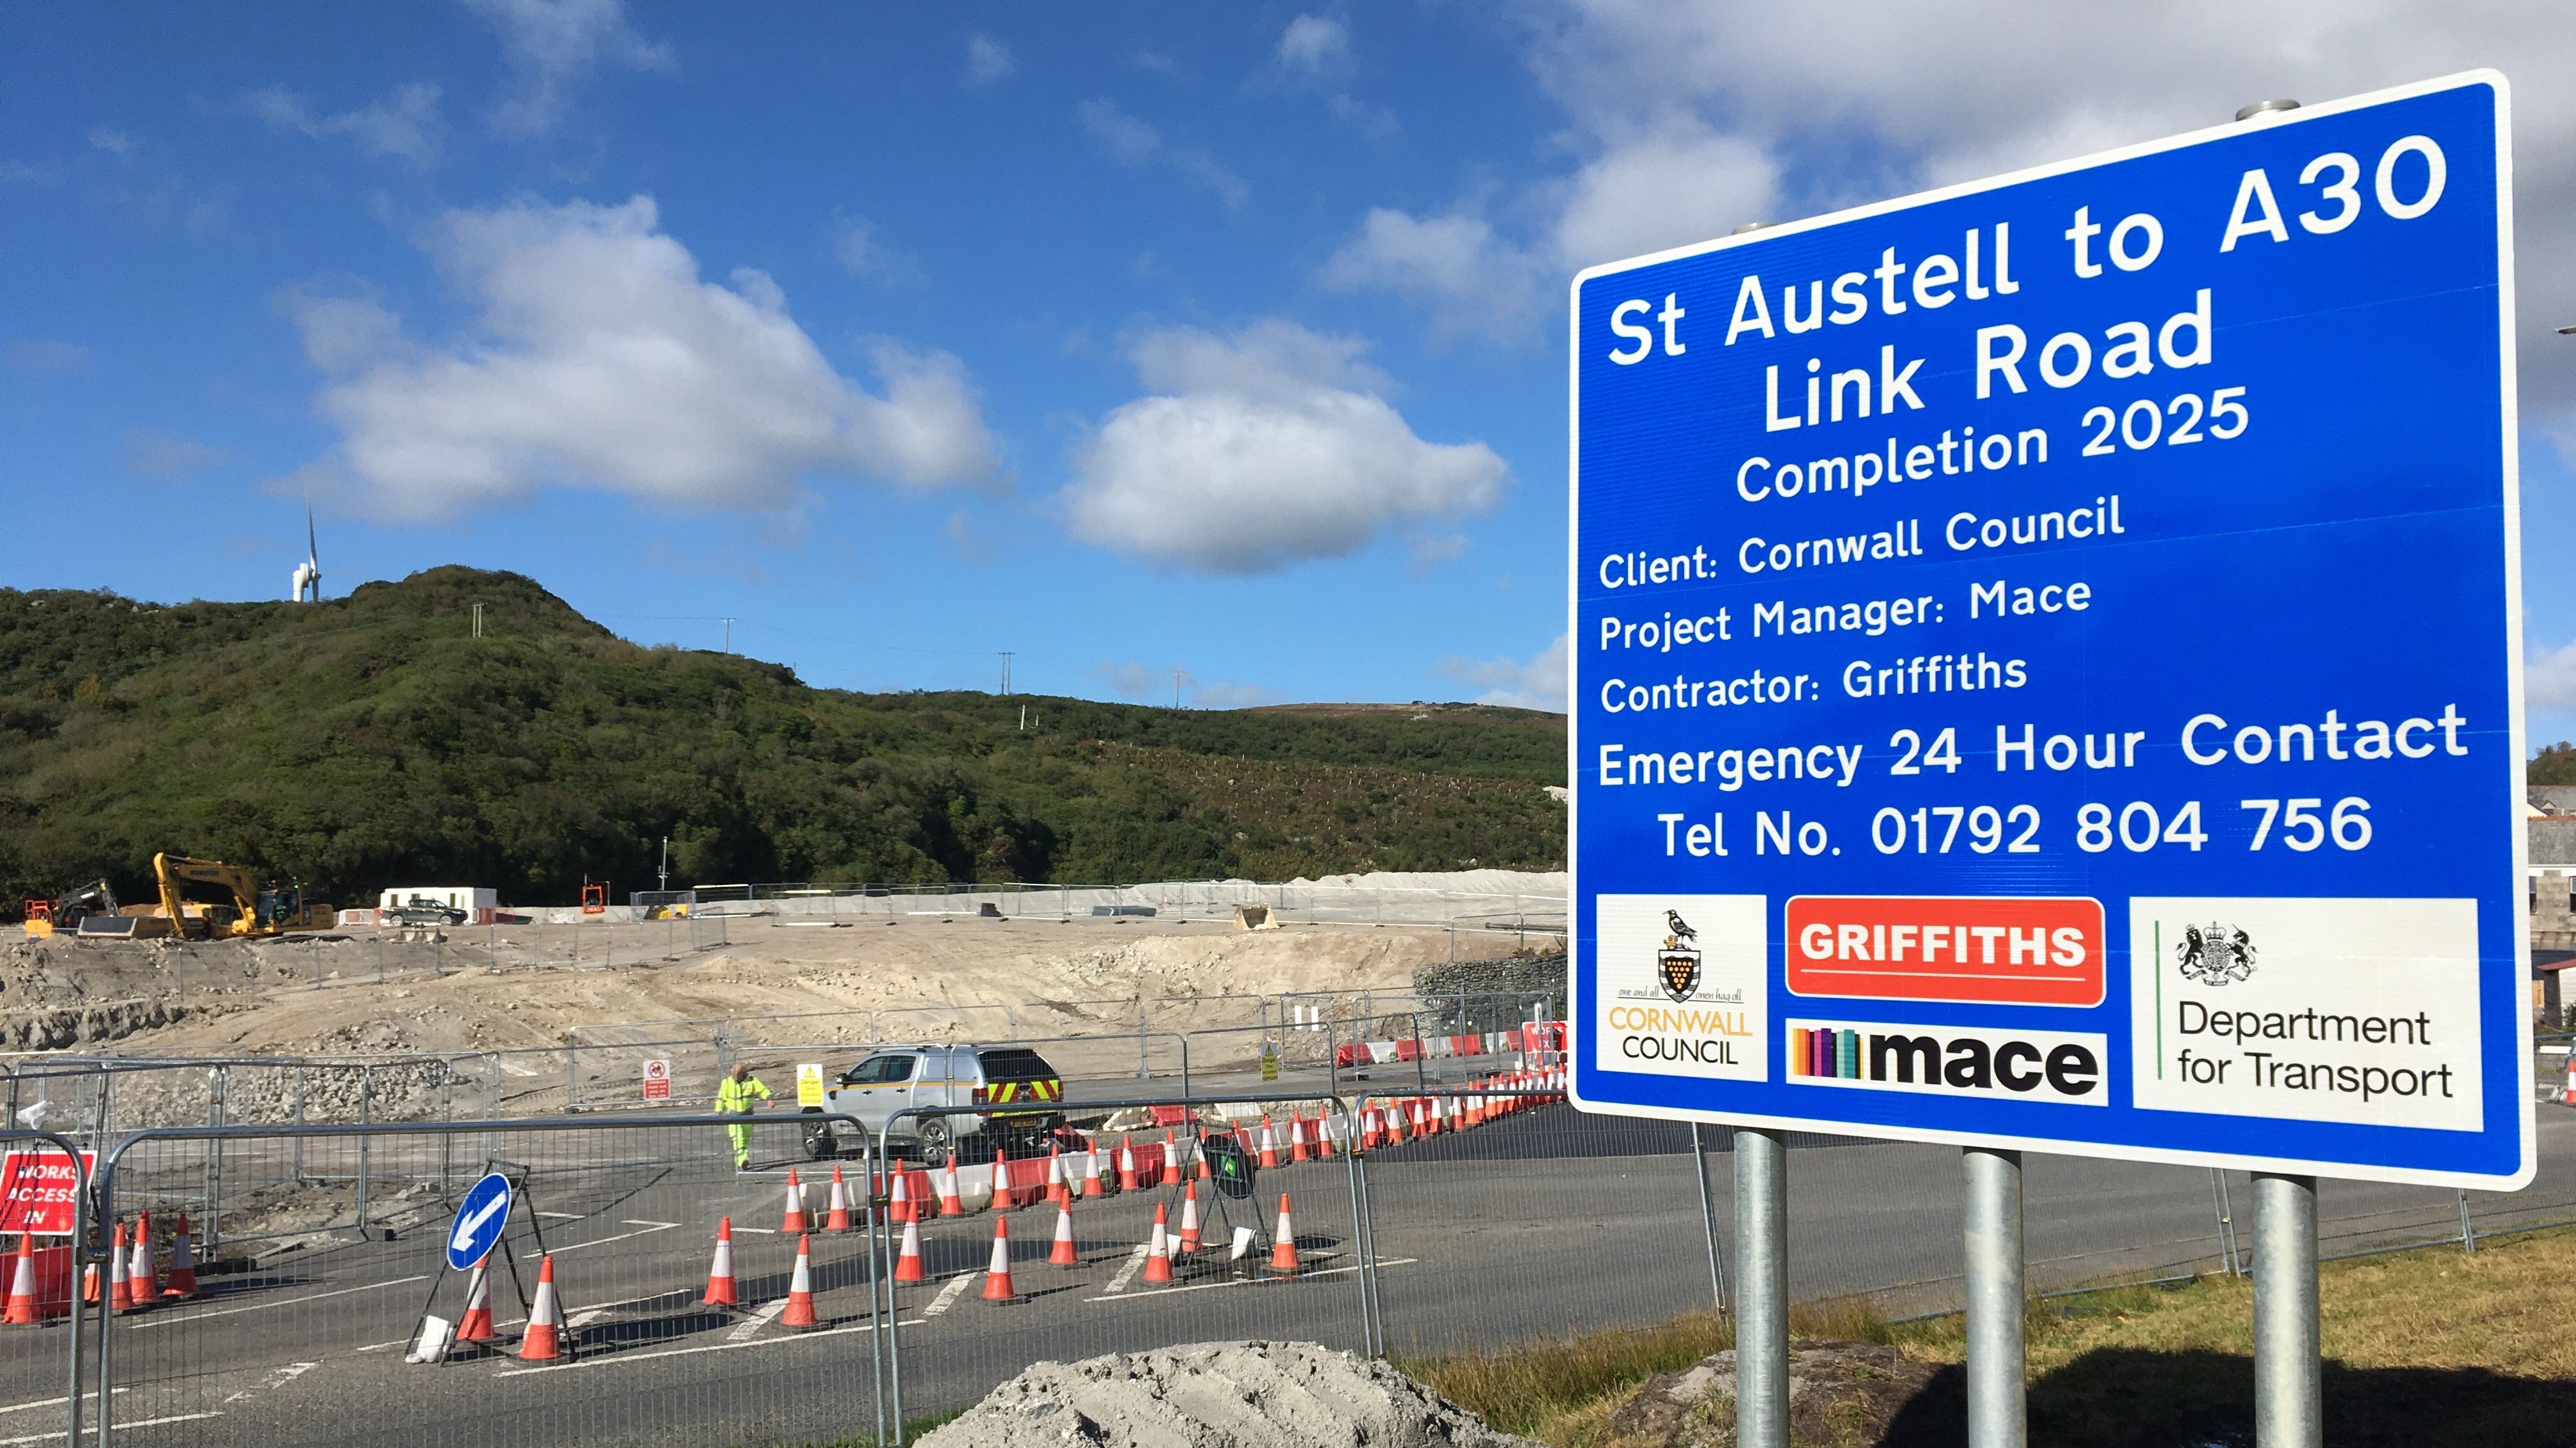 St Austell To A30 Link Road.JPG?quality=80&format=jpg&crop=305,0,2571,4032&resize=crop